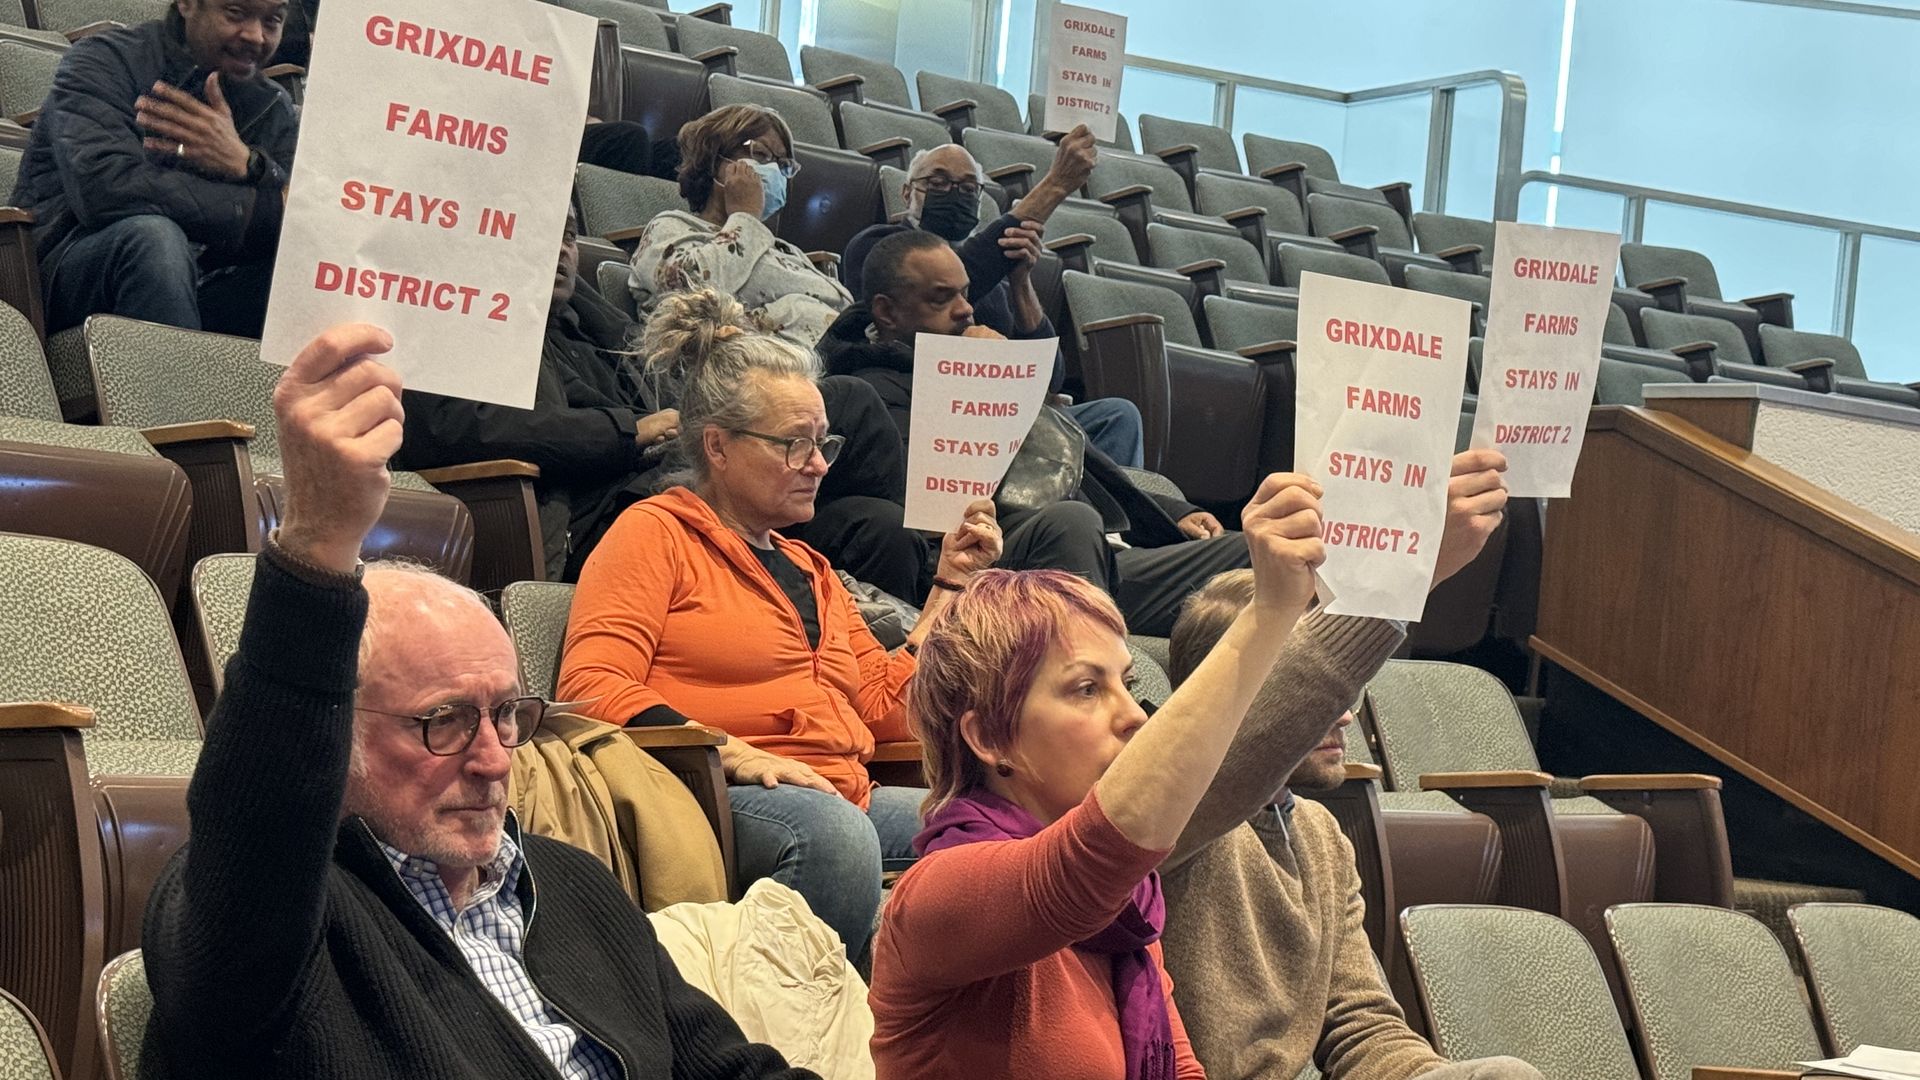  Grixdale Farms residents Tim and Ginger Quinn sit beside Asher Van Sickle, all of whom spoke yesterday at City Council urging members to stay in District 2, which is represented by Angela Whitfield Calloway. Photo: Samuel Robinson/Axios